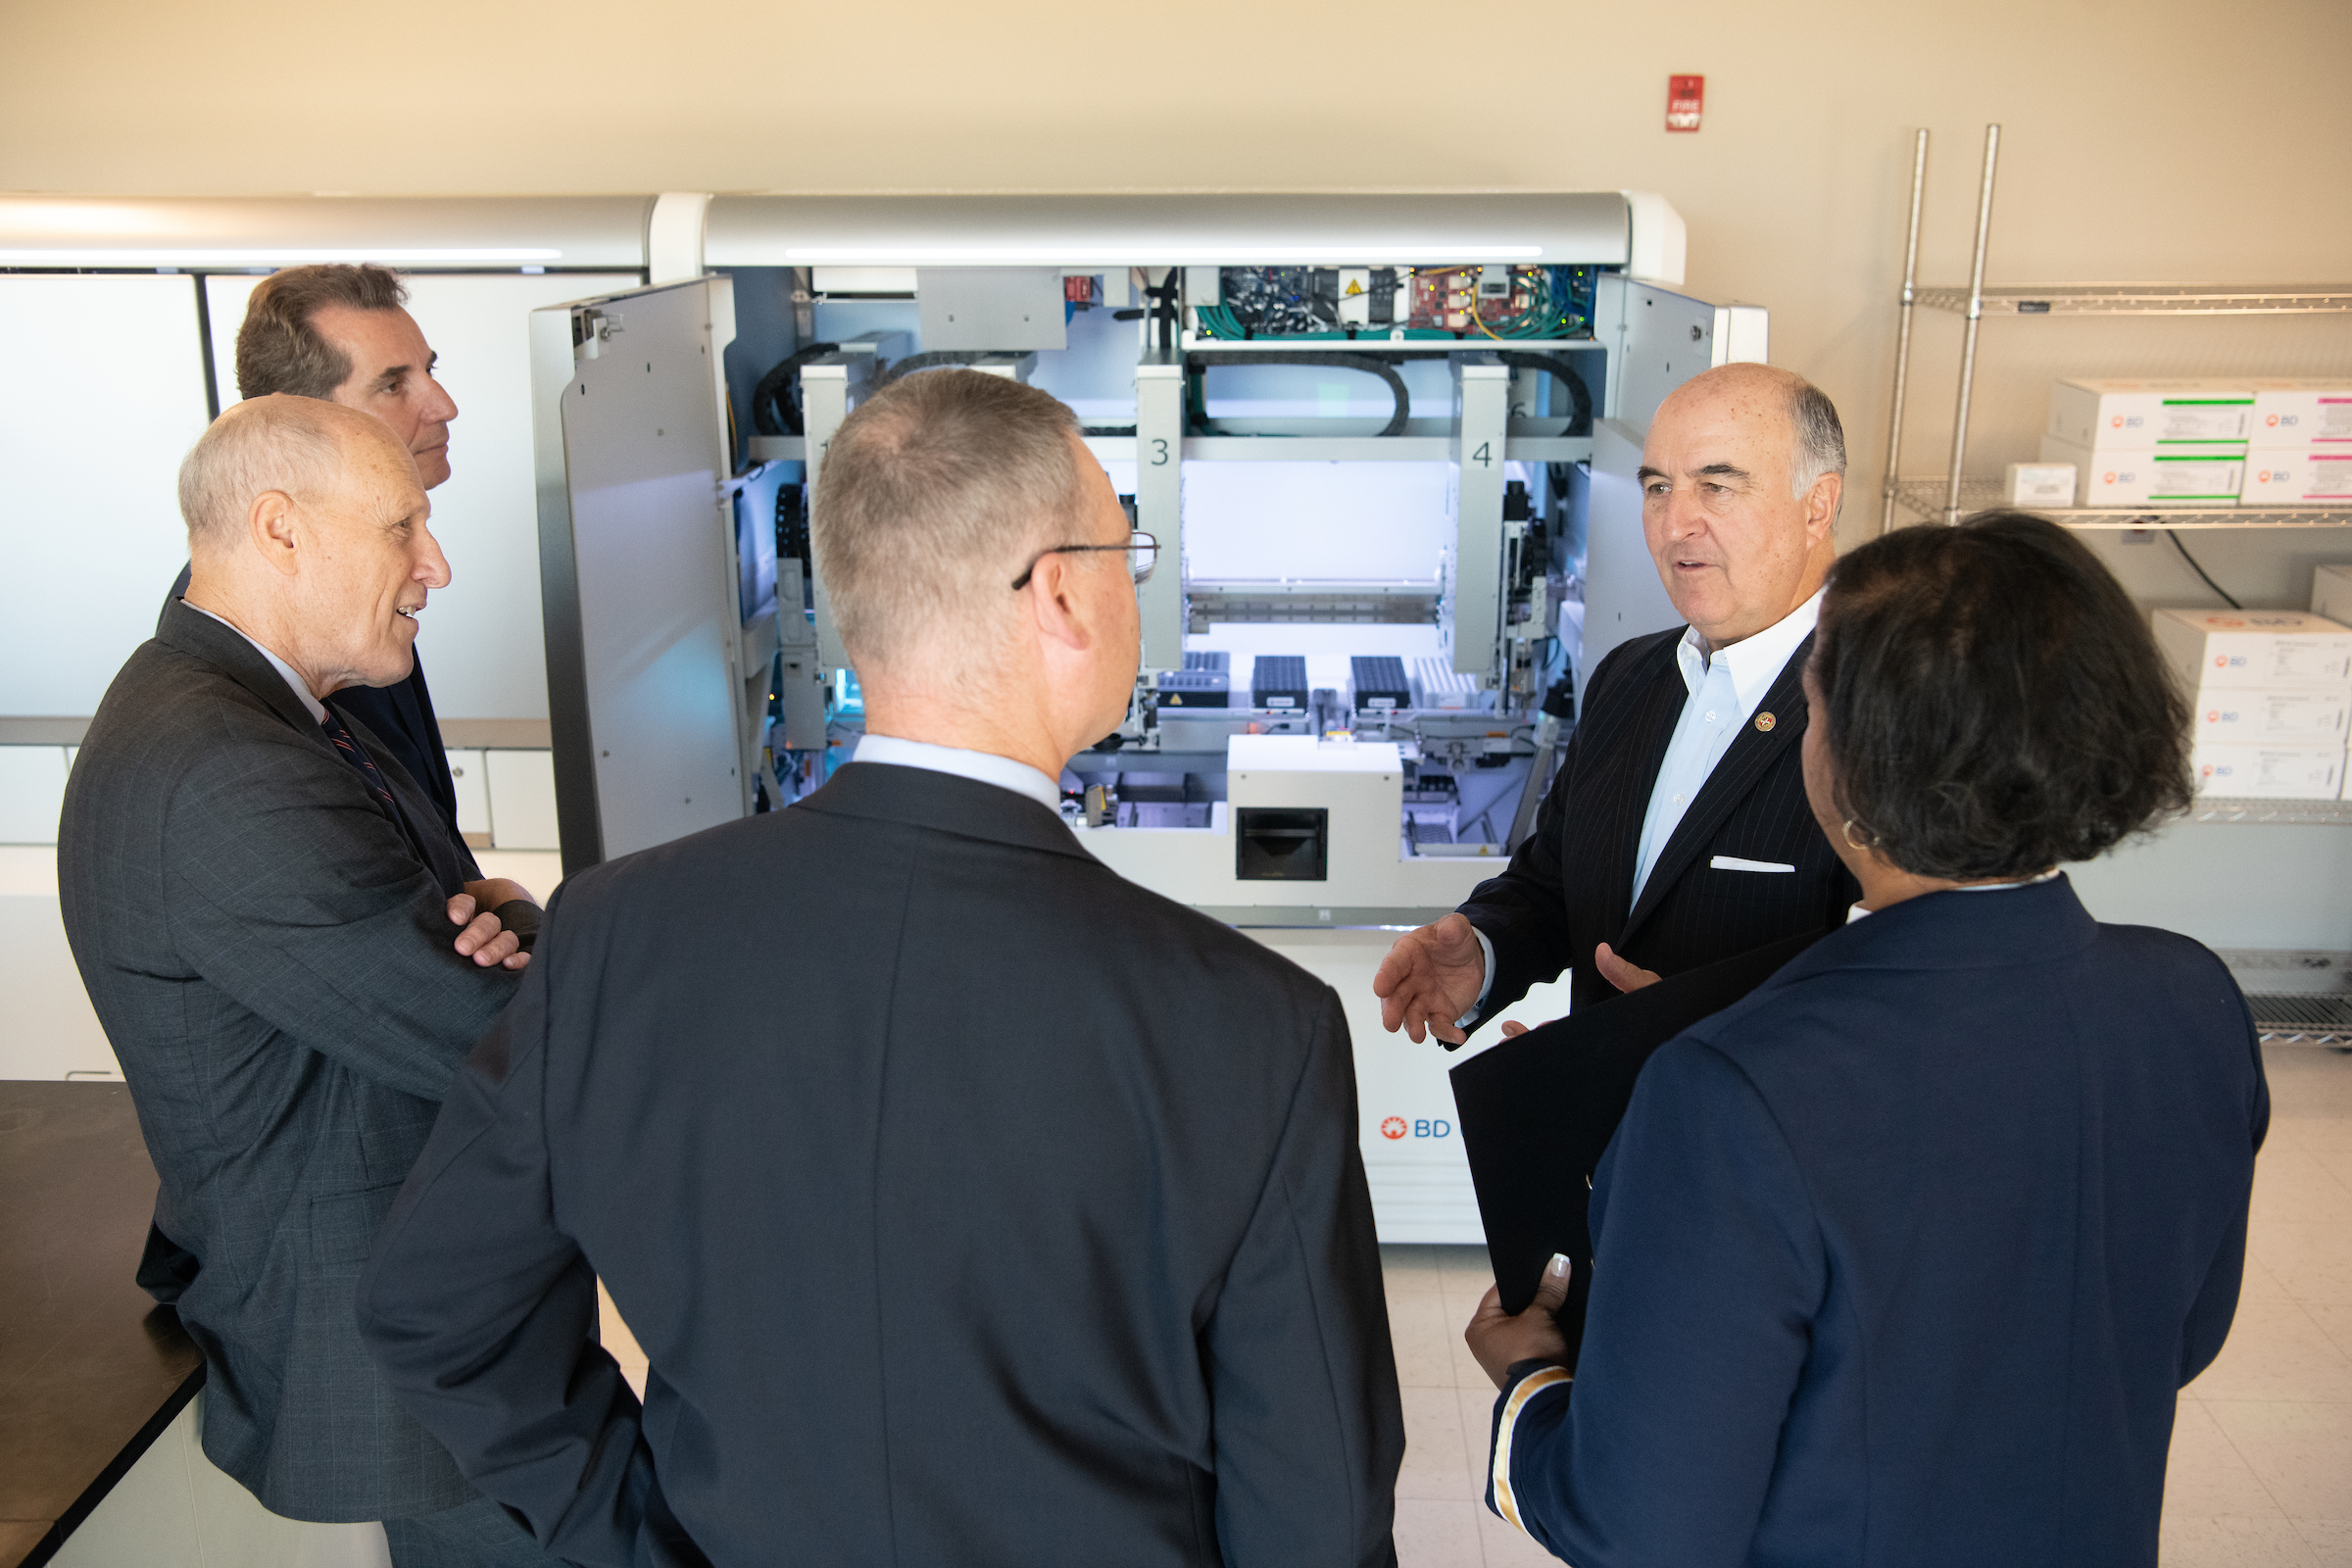 Maryland Commerce Secretary Mike Gill engages in conversation with UMB President Bruce E. Jarrell, MD, FACS, and BD executives Nikos Pavlidis, Adam Steel, and Brooke Story during a tour of the BD Innovation Center.